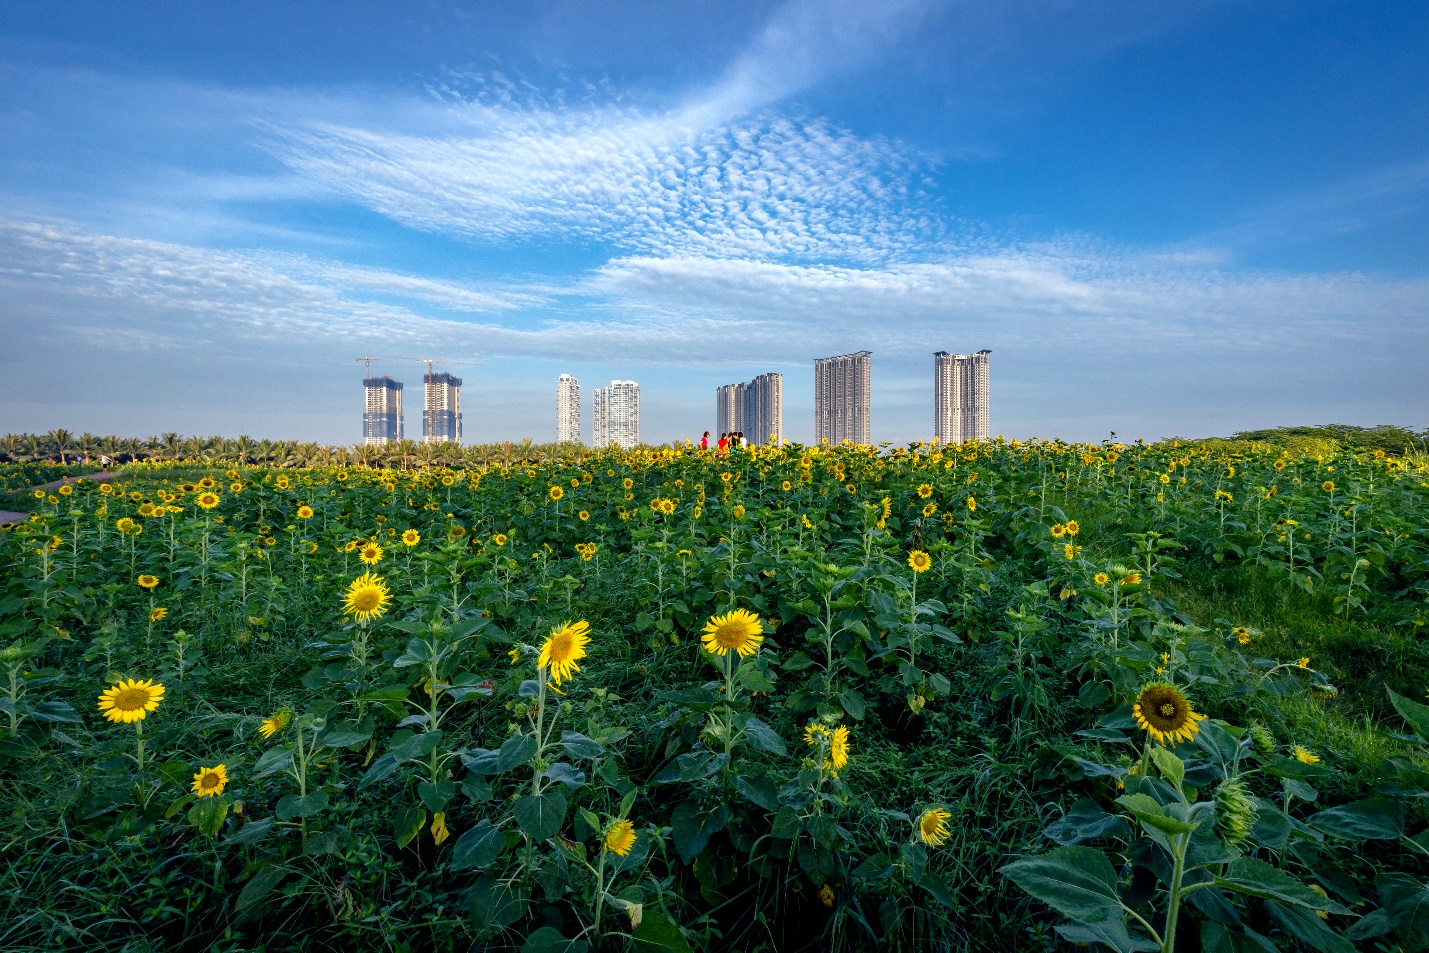 A field of flowers with a city in the background

Description automatically generated